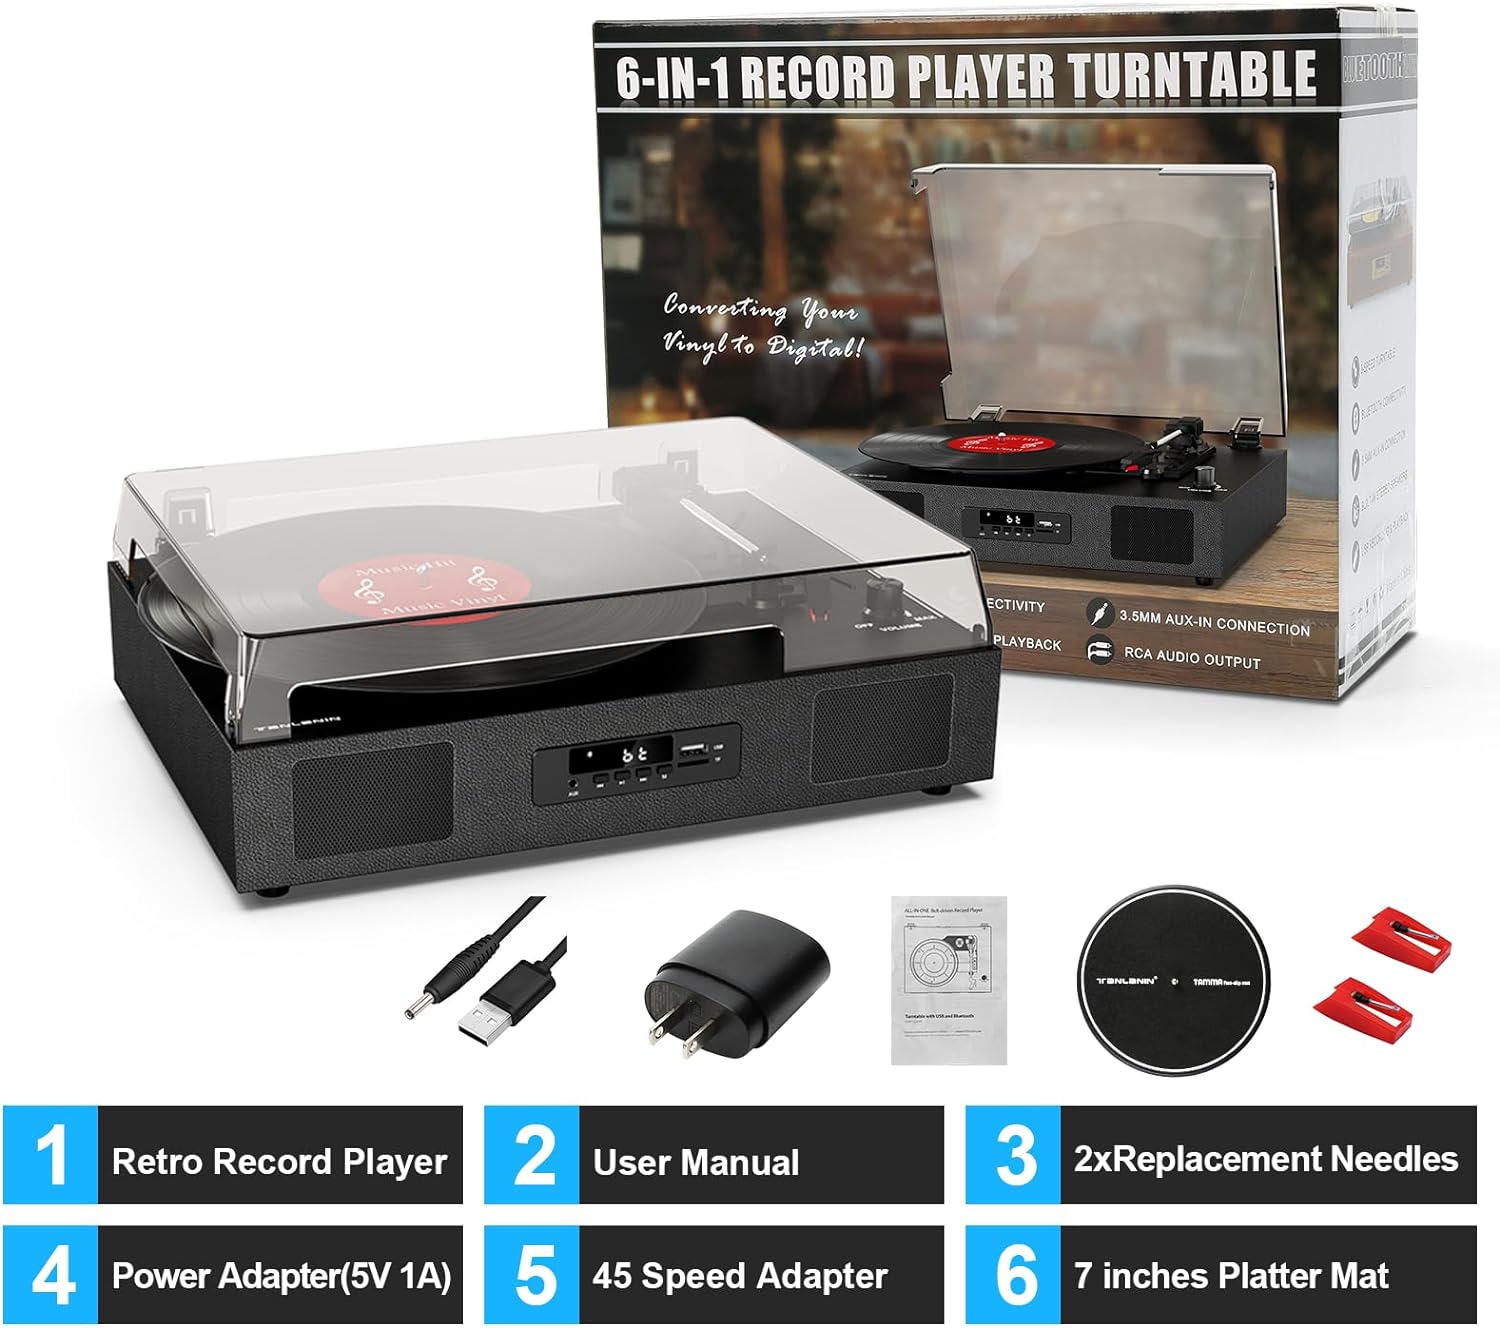 Vinyl Record Player with Built-in Stereo Speakers and Bass Adjust Review